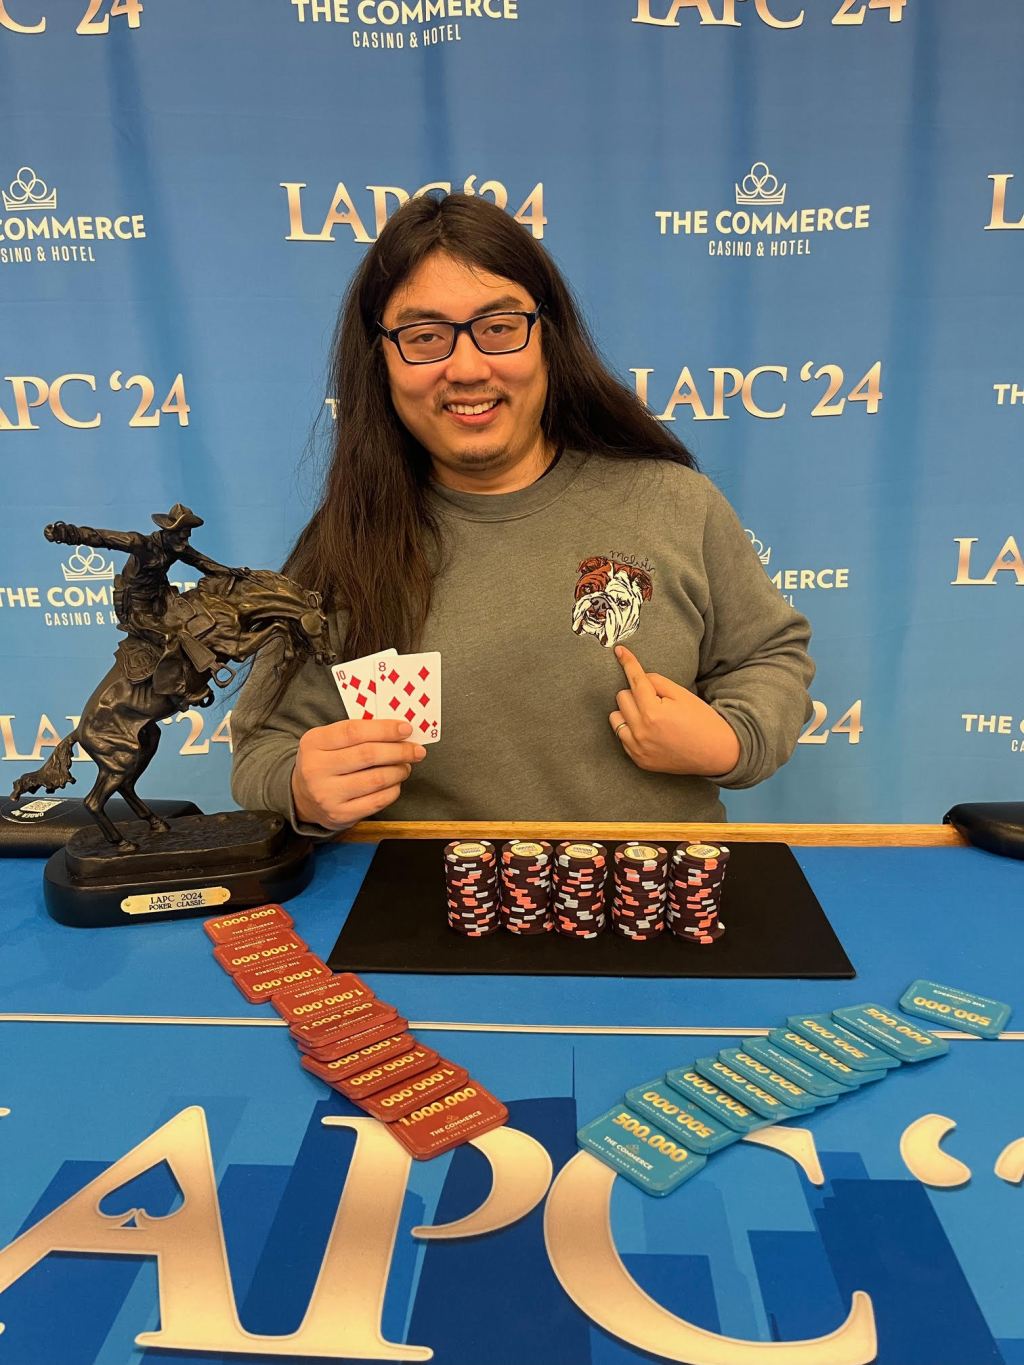 Congratulations to Andrew Cha, Winner of the Remington II Event